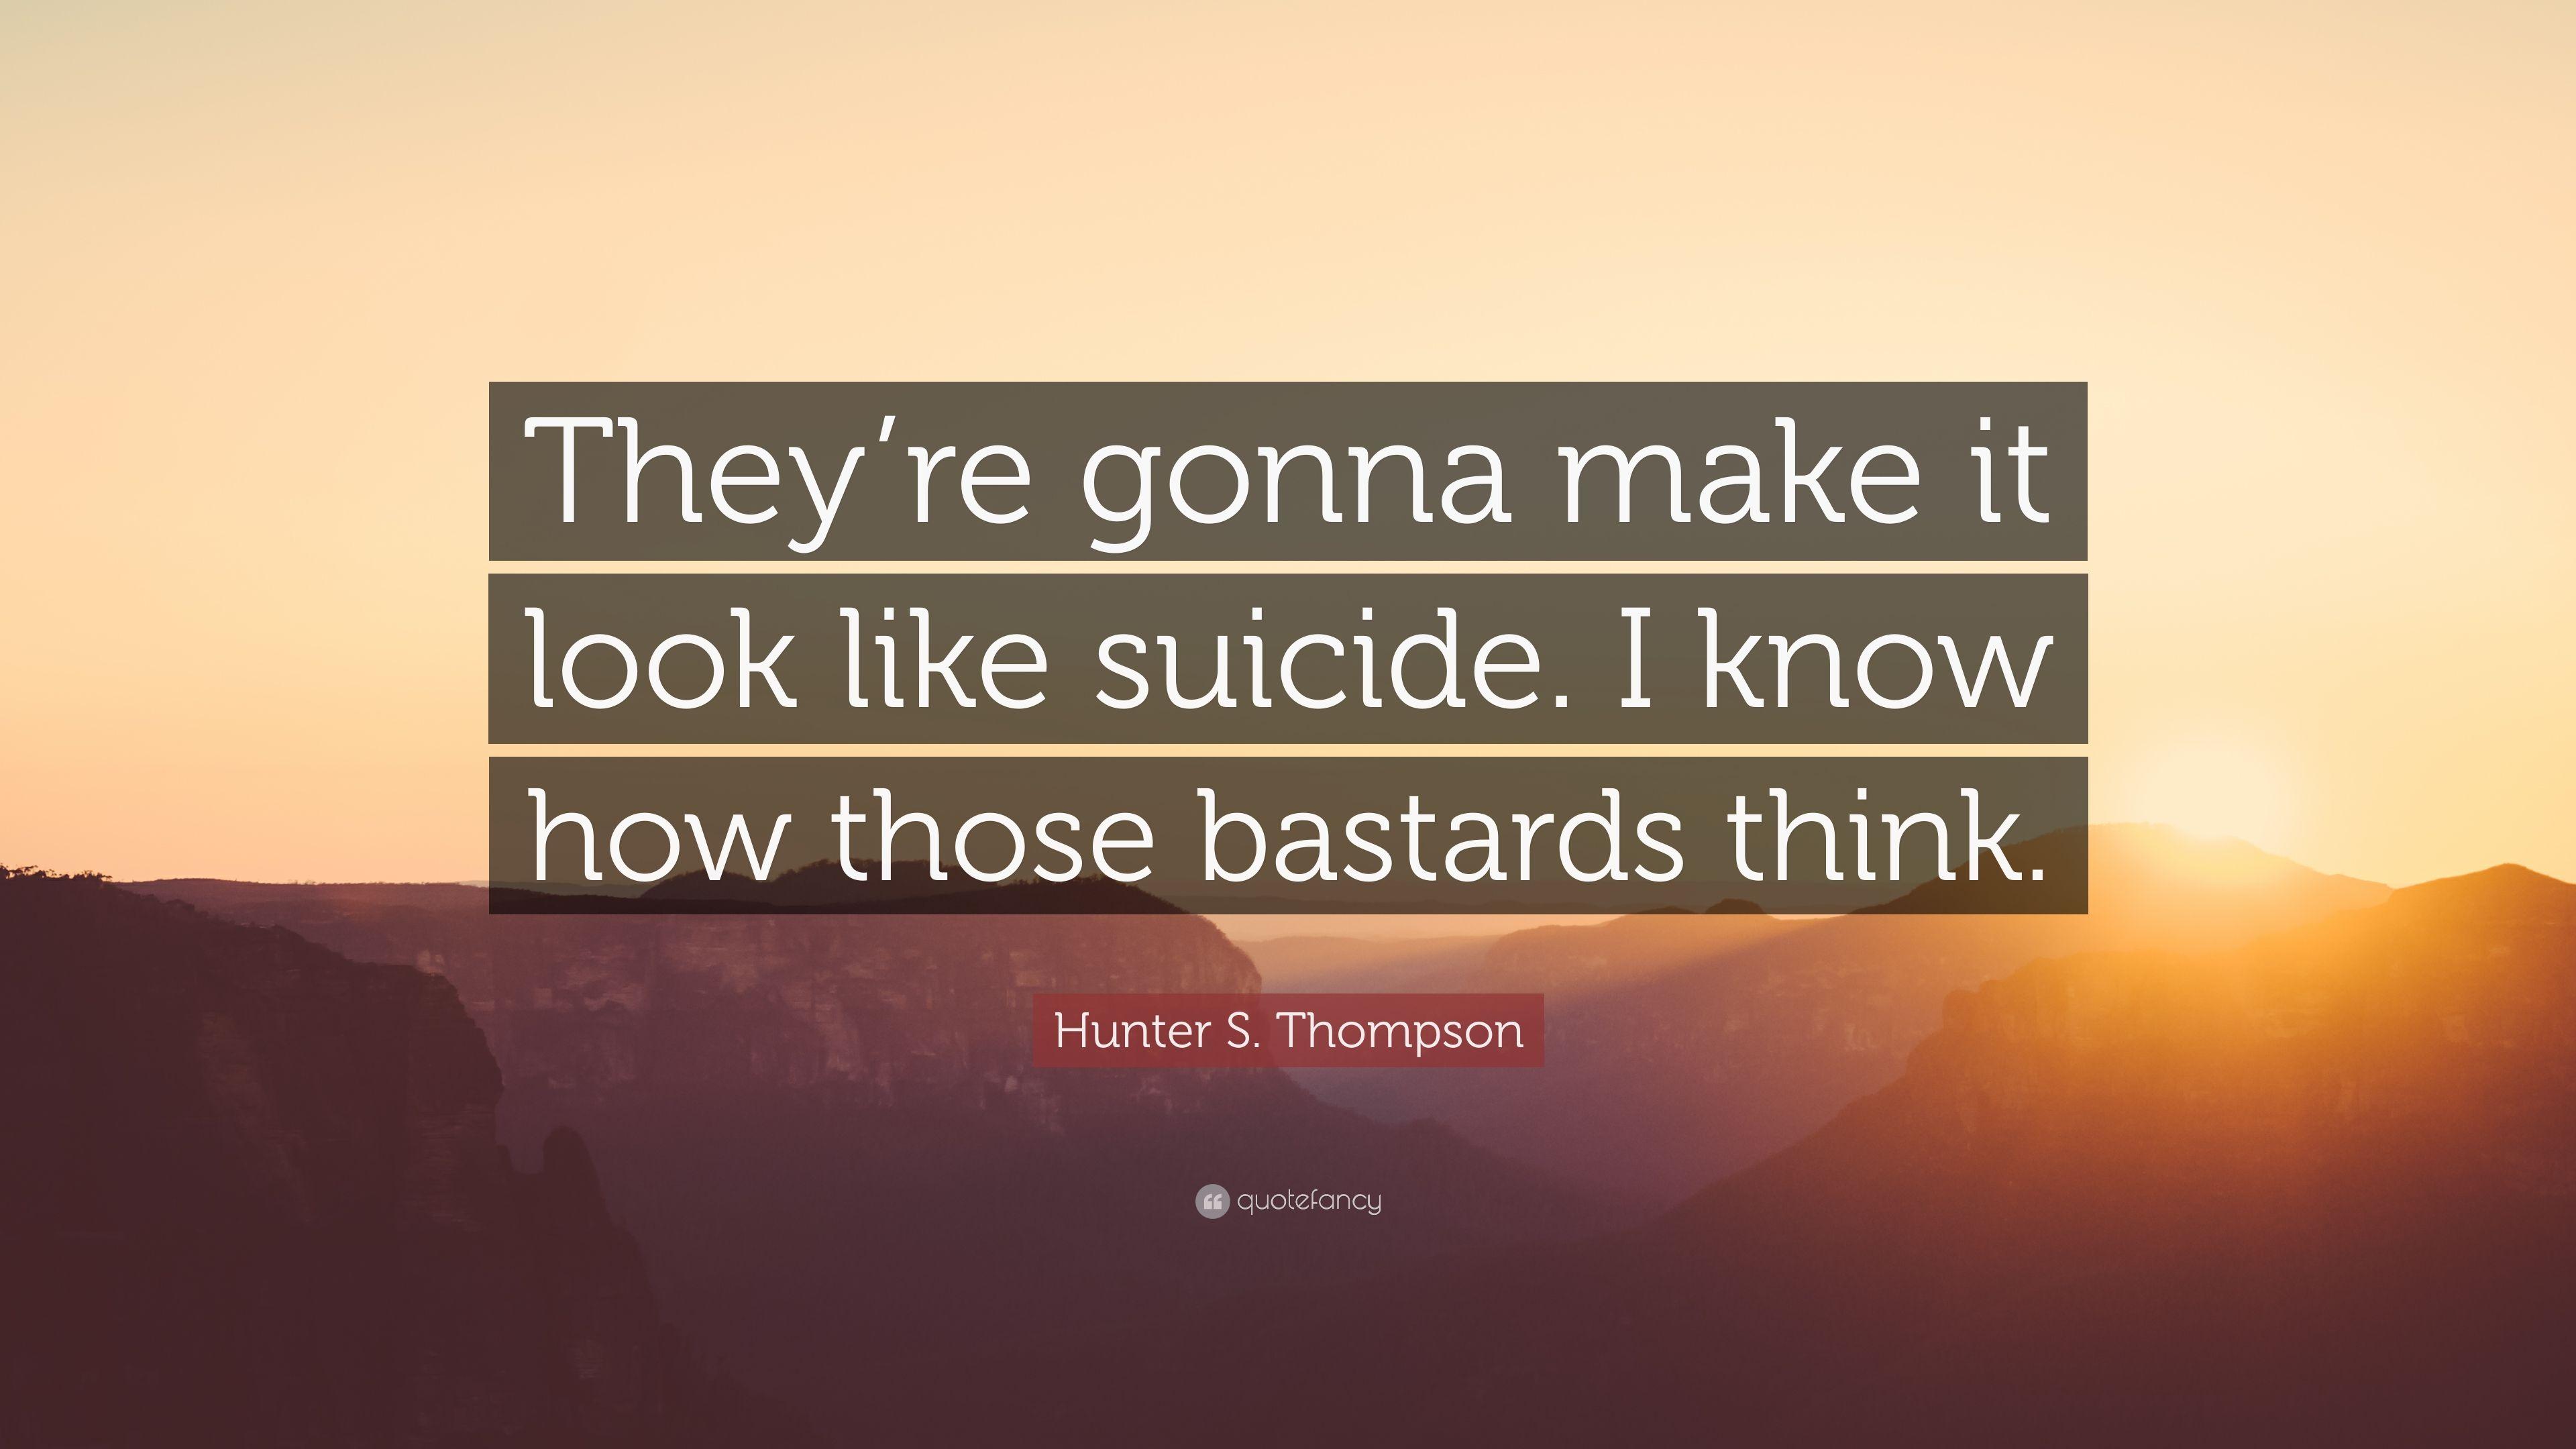 Hunter S. Thompson Quote: "They're gonna make it look like suicid...